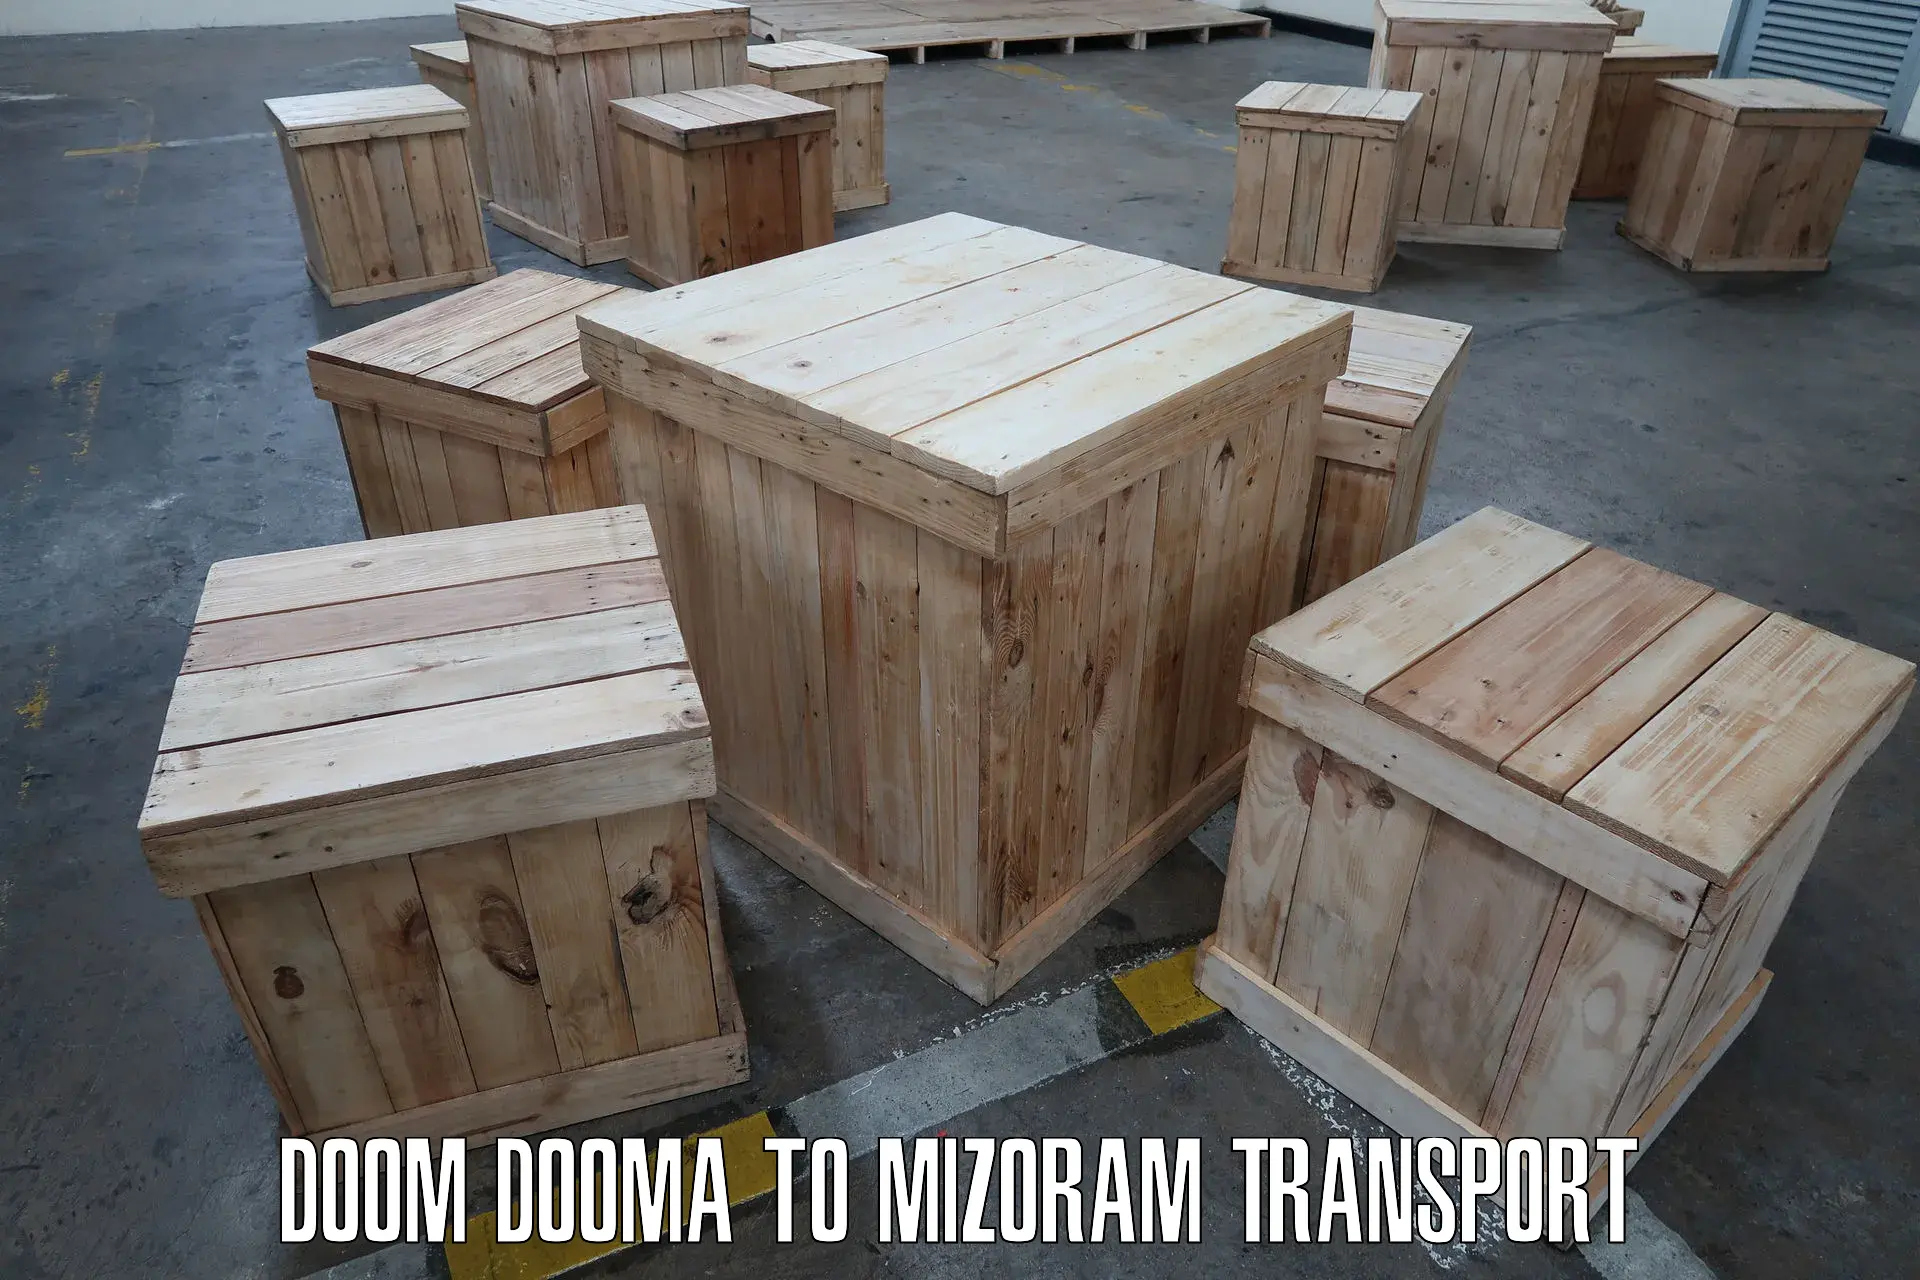 Daily transport service Doom Dooma to Darlawn